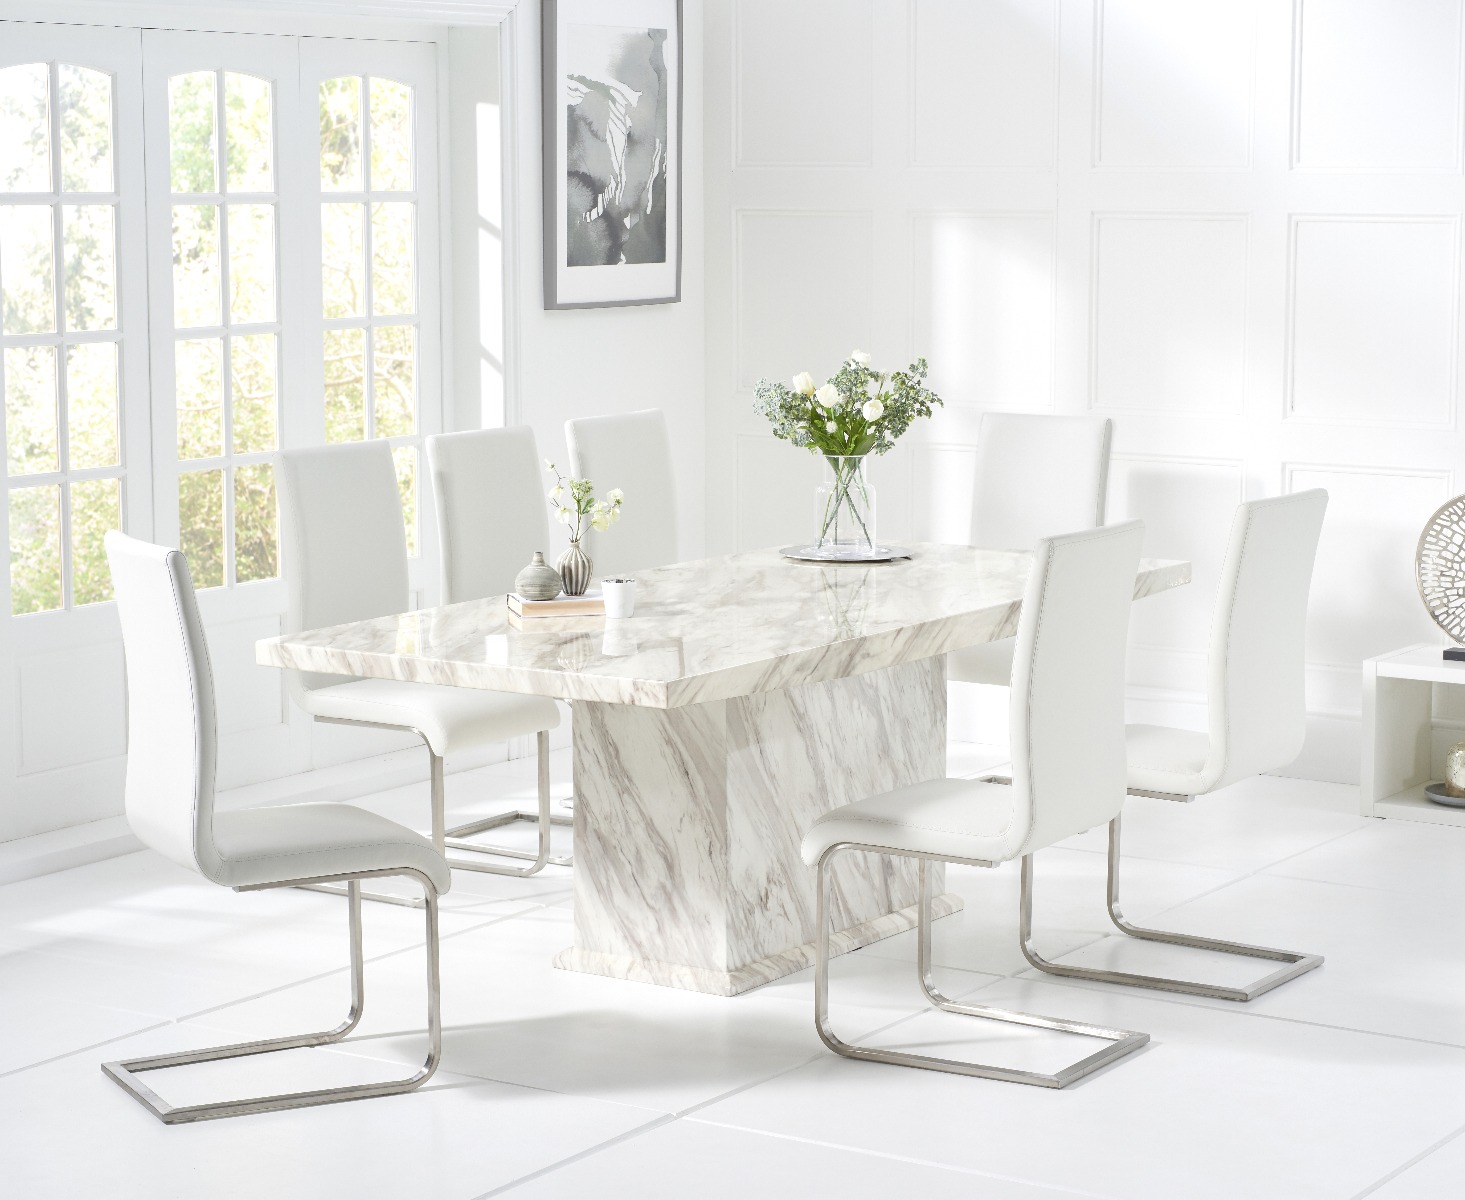 Calacatta 220cm Marbleeffect Dining Table With 12 Grey Malaga Chairs